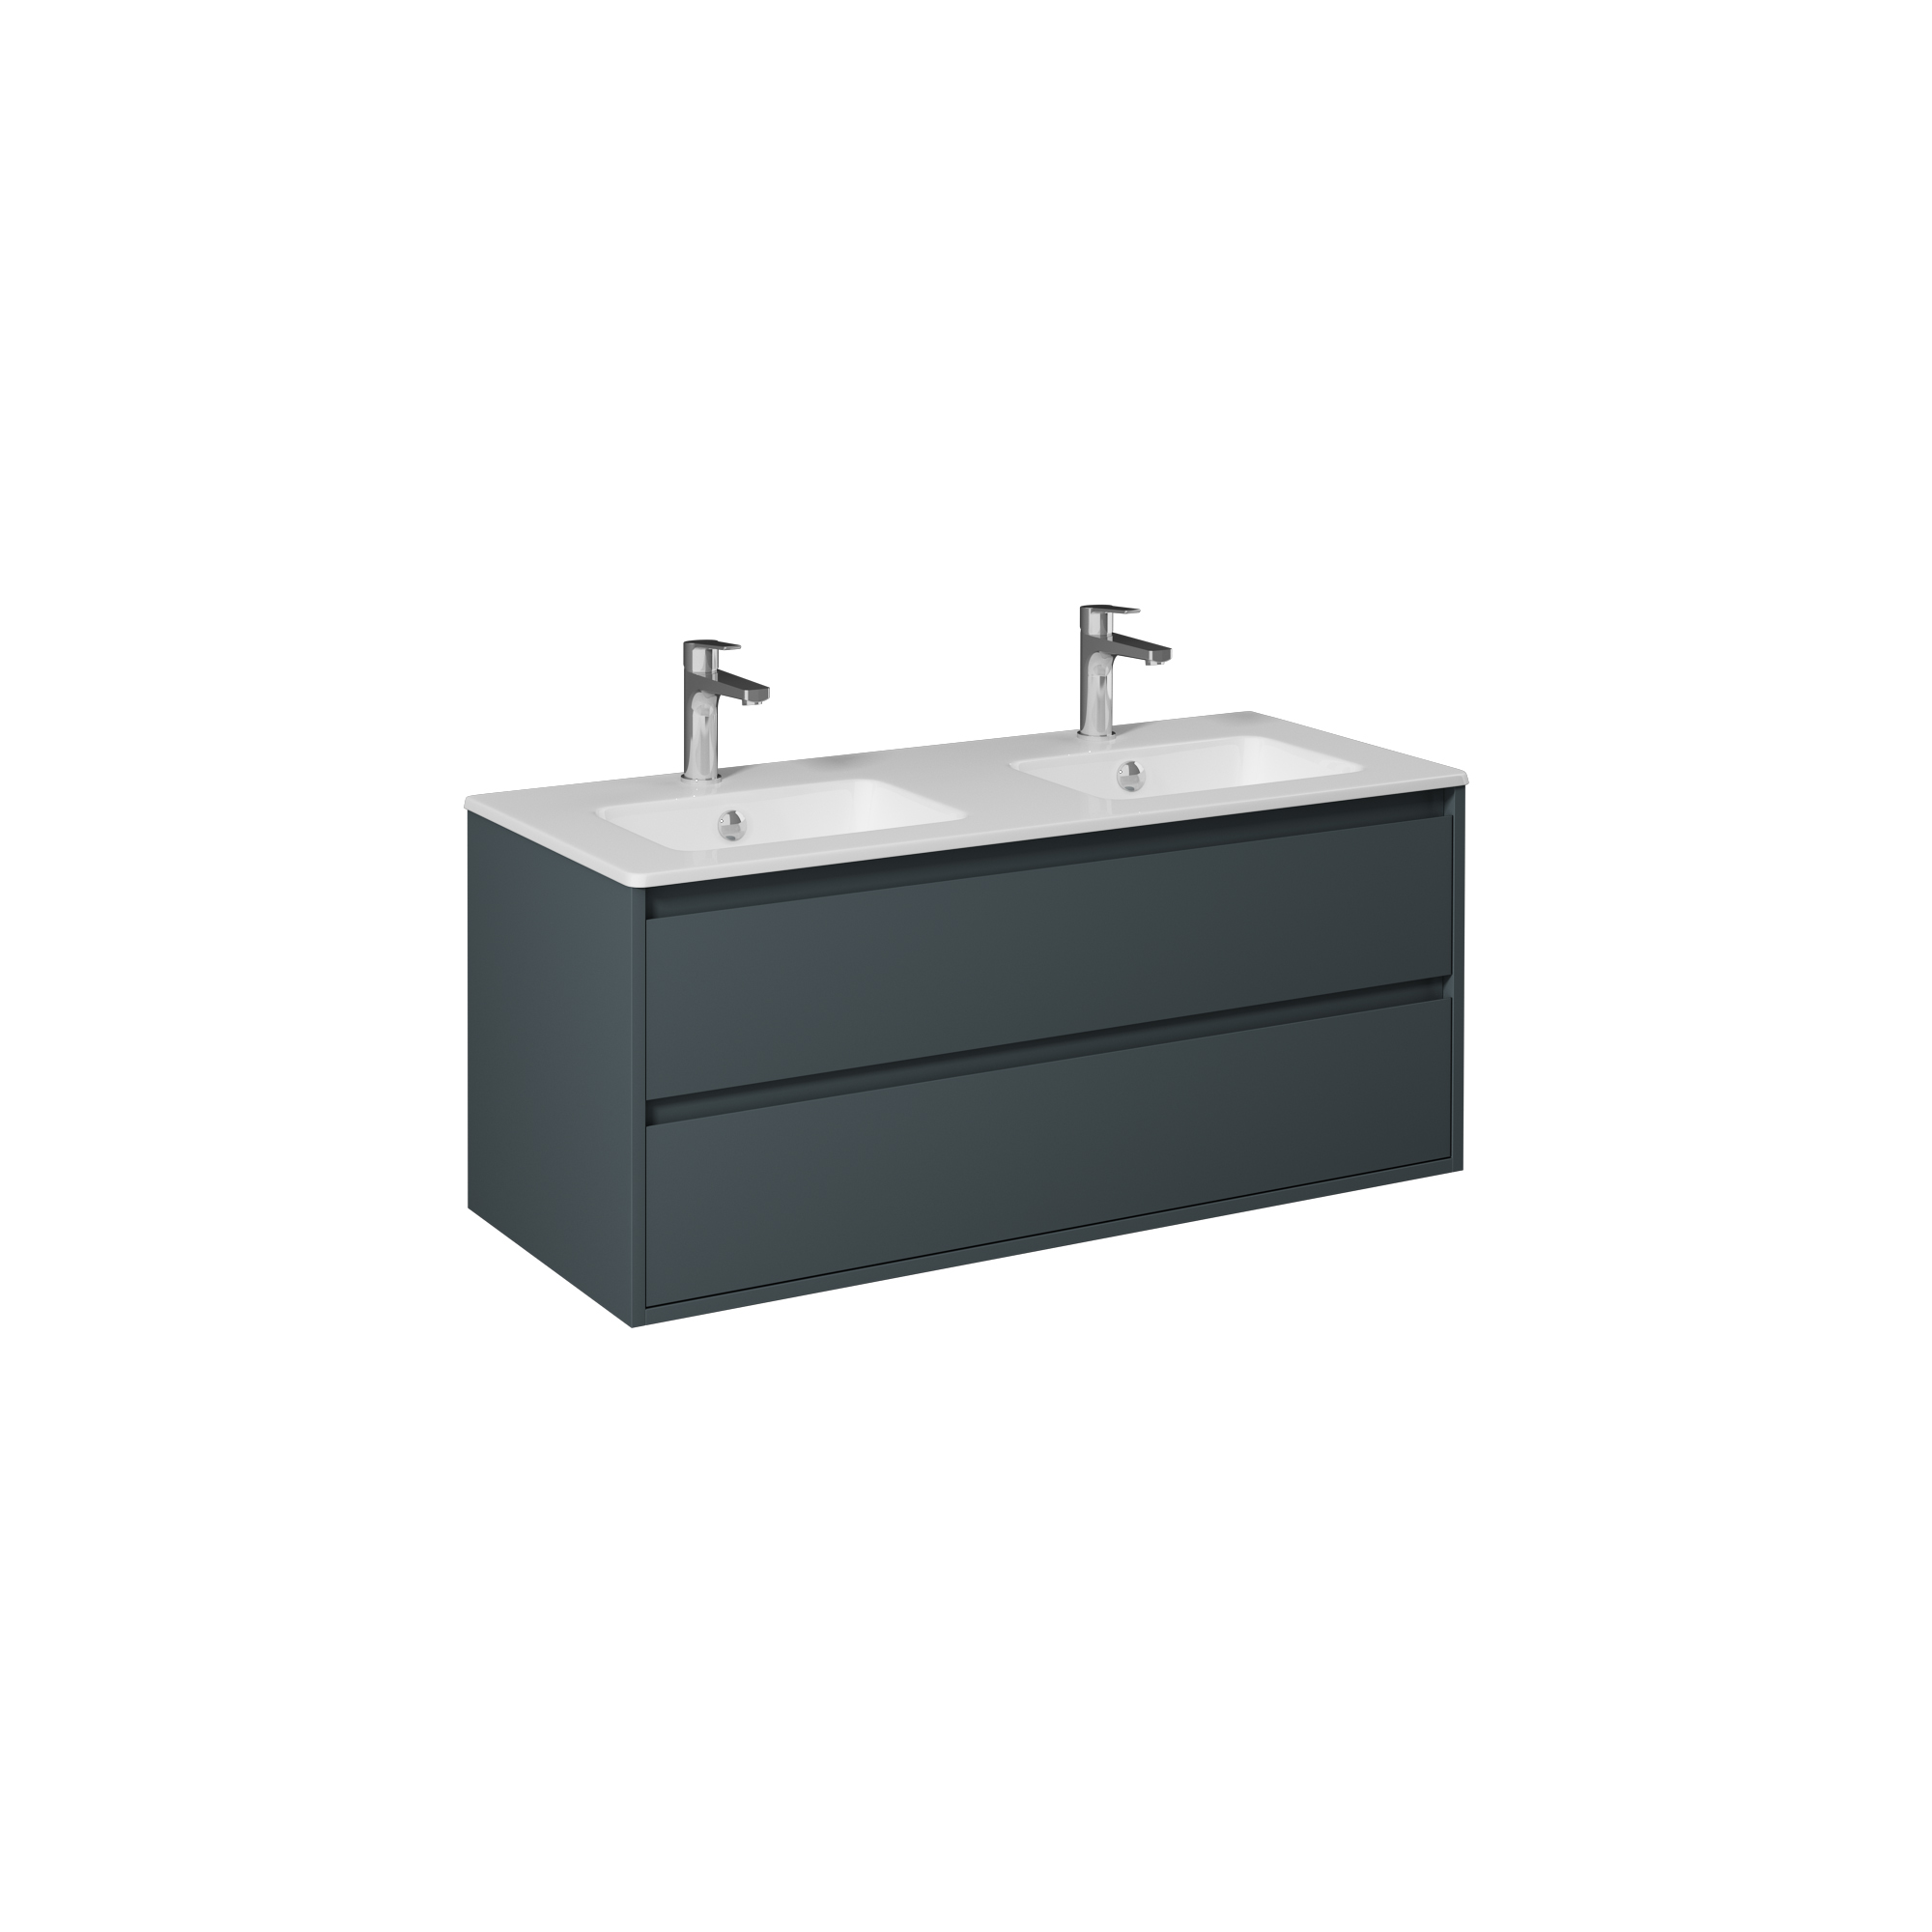 Pro Cabinet Washbasin Cabinet, Anthracite Lacquer Double Drawer 47"